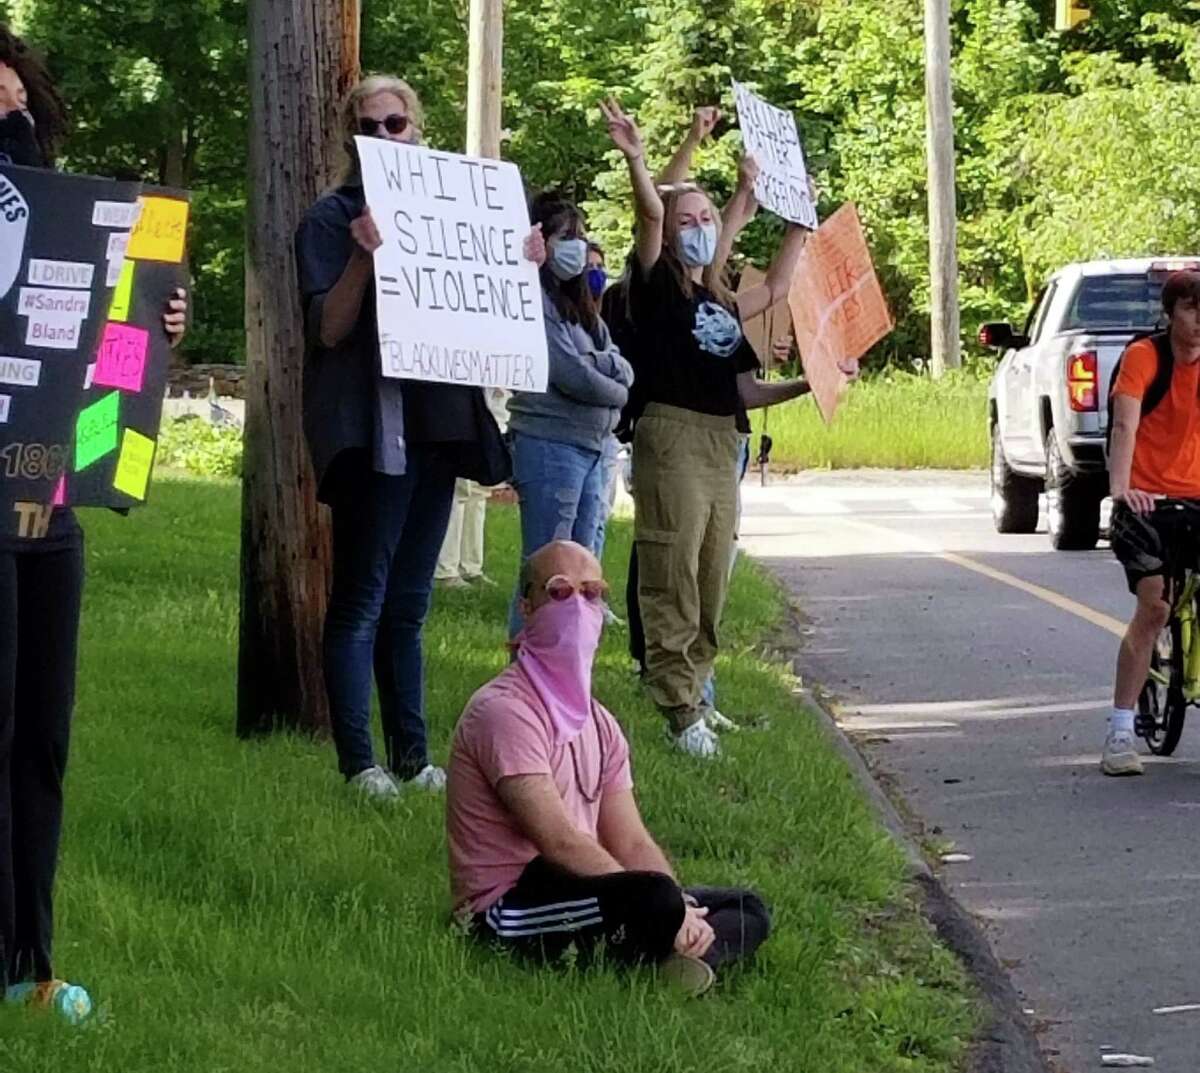 Protesters lied the side of Huntington Green on Sunday. The people were joining in what has become a country-wide protest of Minneapolis man George Floyd's death while in police custody last week.